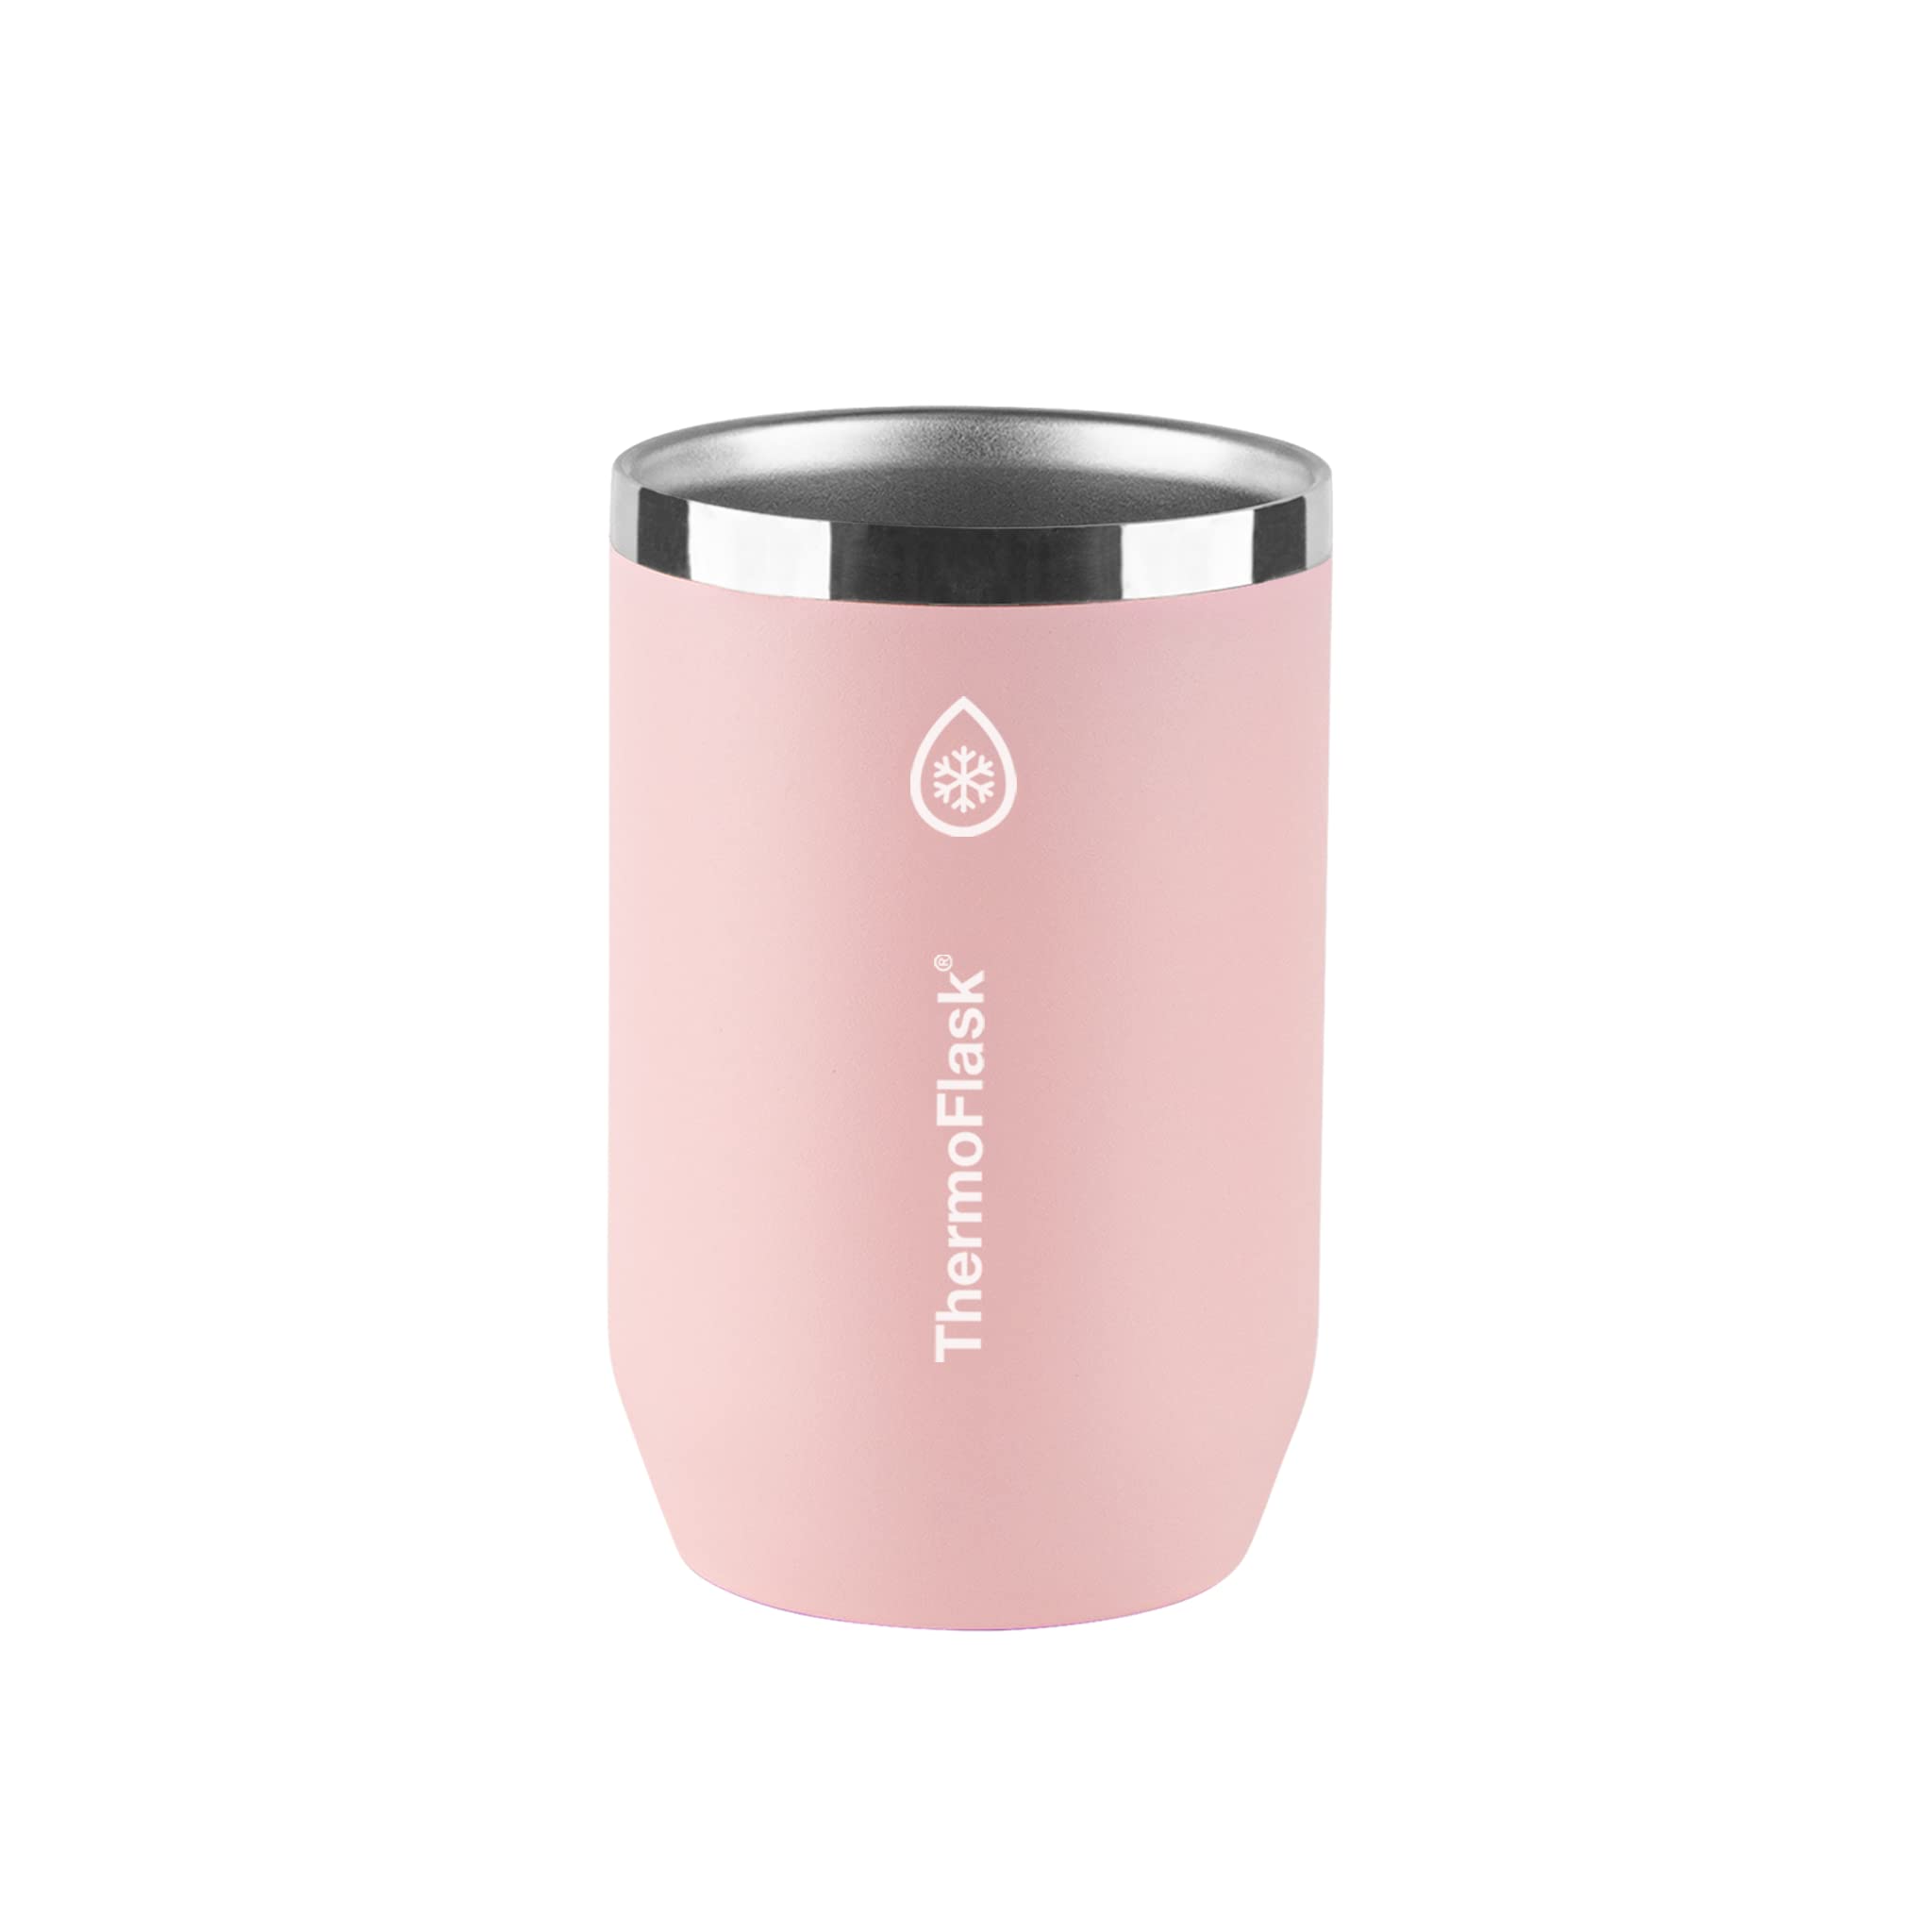 12-Oz ThermoFlask 2-in-1 Vacuum Insulated Can Koozie Cooler & Cup Fits Standard Size Cans w/ Non-Slip Base (Pink Salt) & More $10.65 + Free Shipping w/ Prime or on $35+